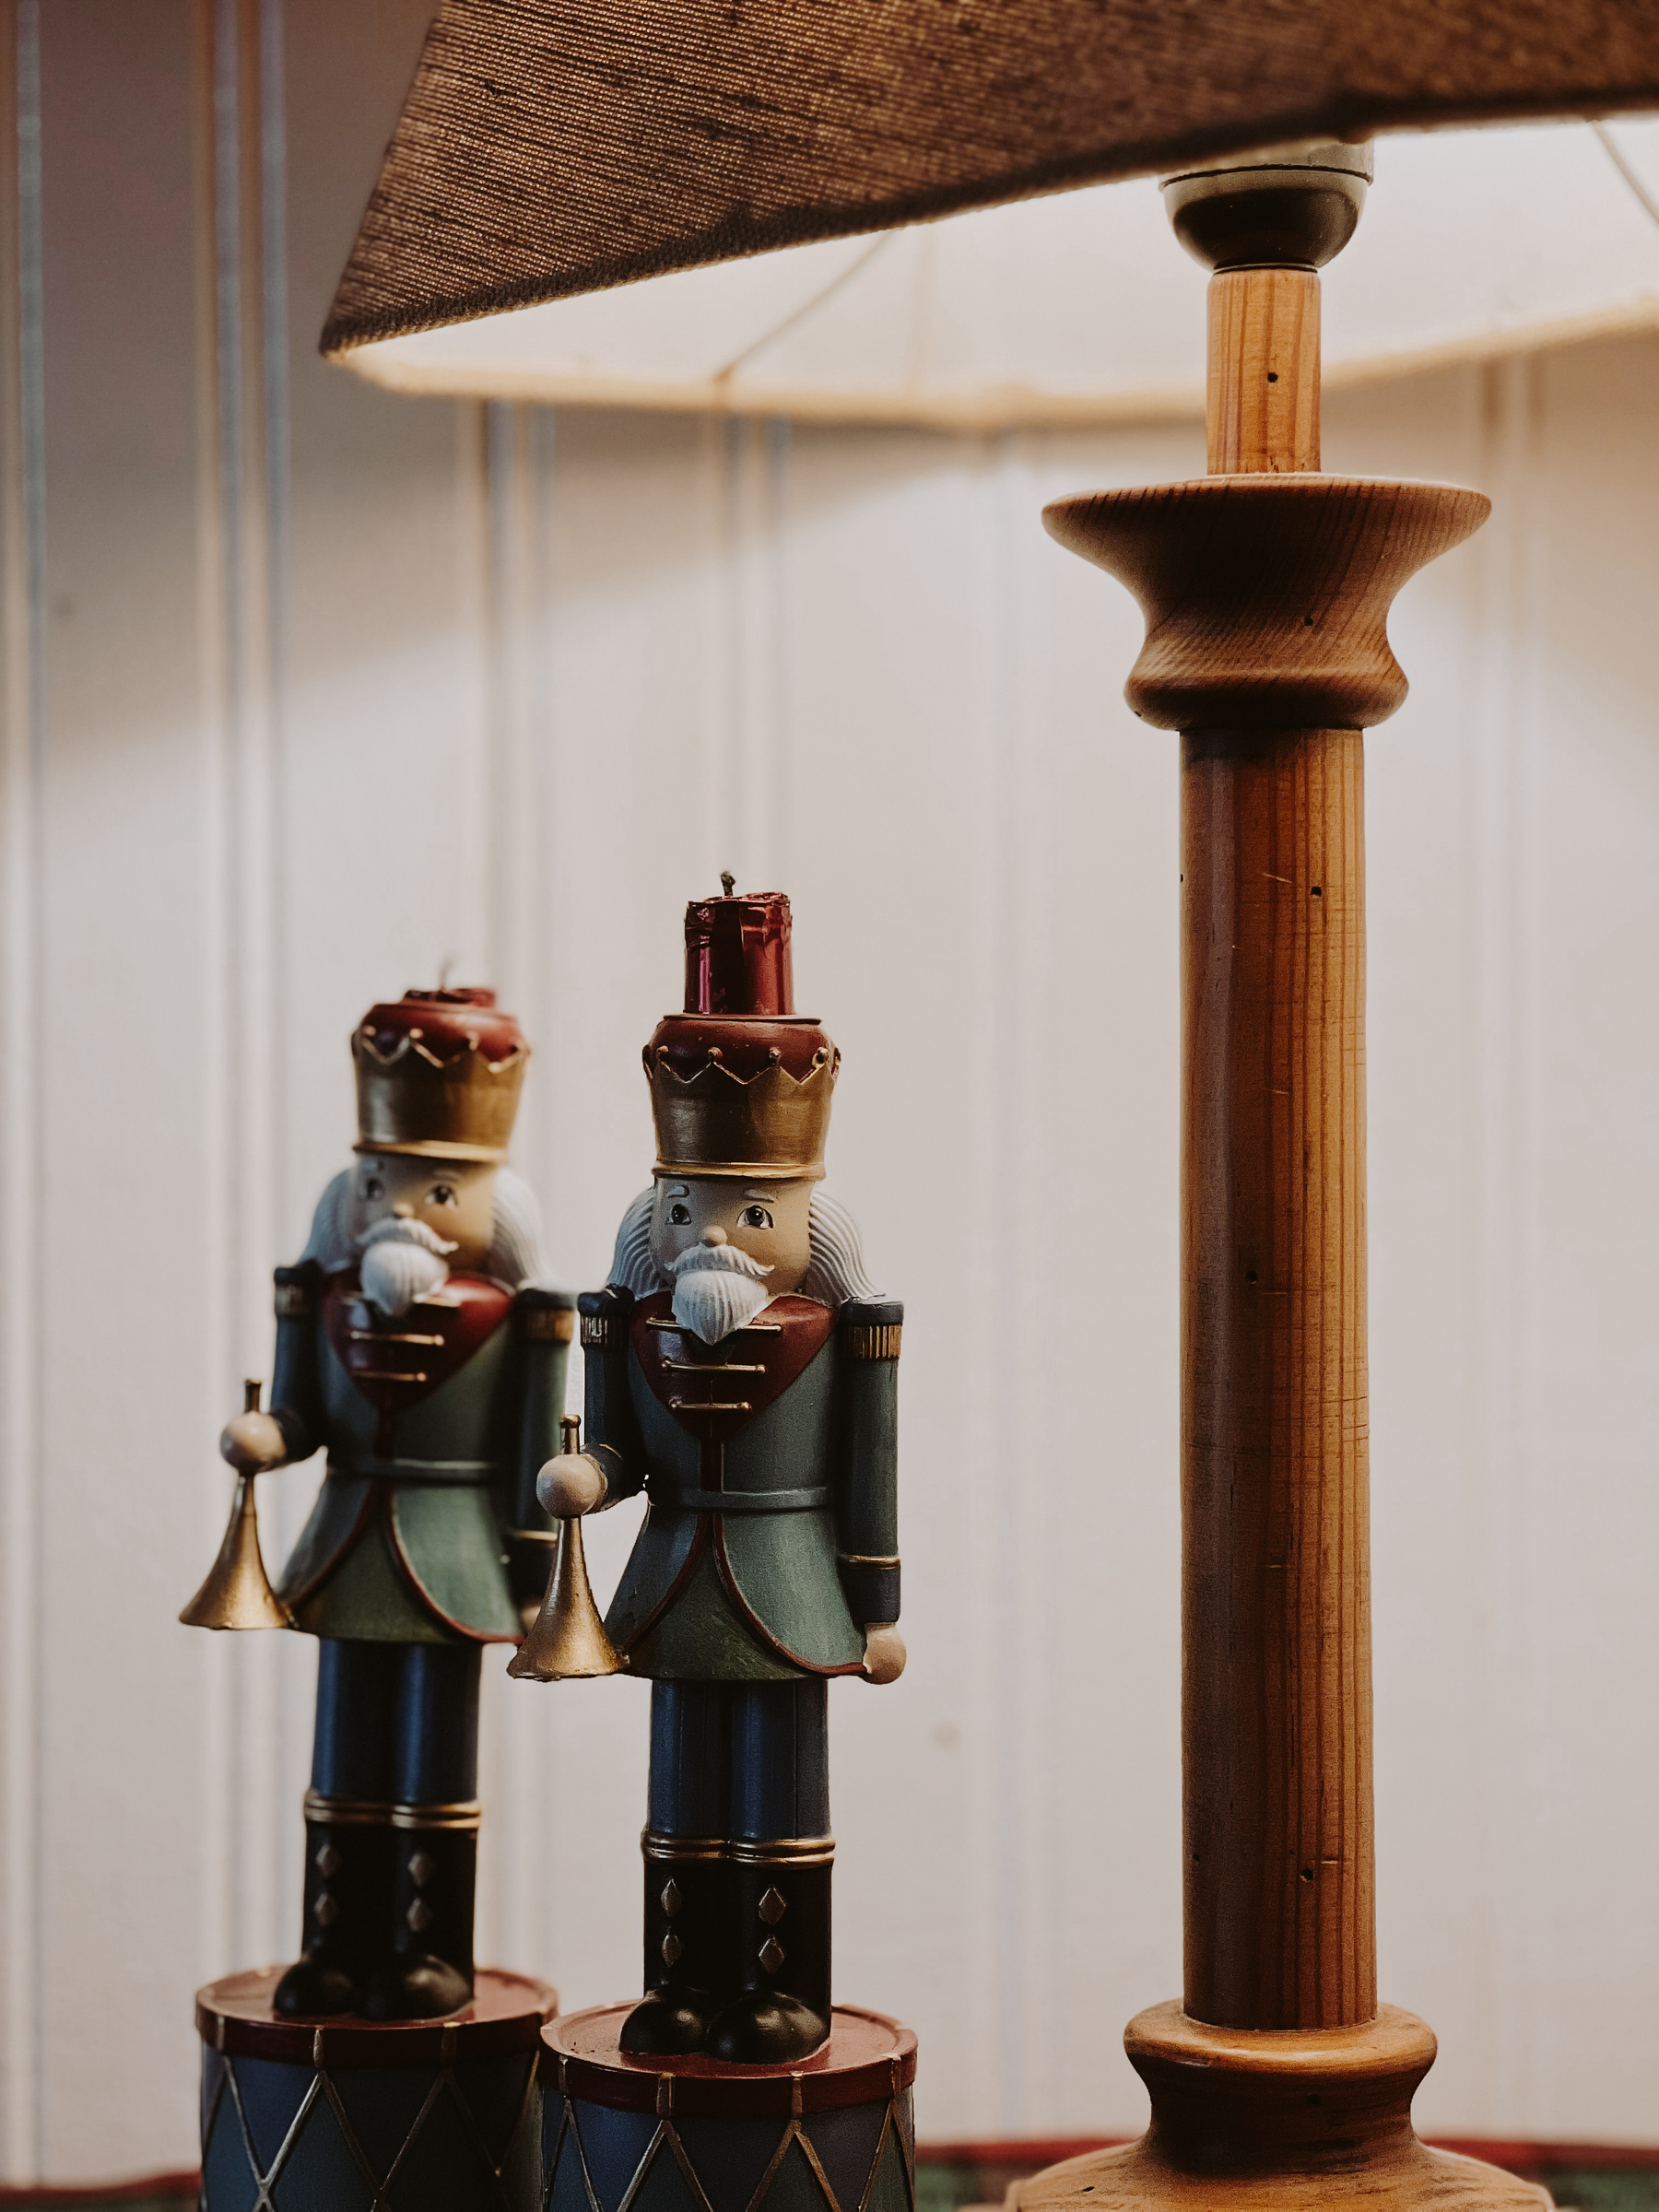 Two nutcracker figurines positioned on either side of a wooden lamp stand with a textured lampshade. The nutcrackers are ornately painted with blue uniforms, gold details, and red crowns.